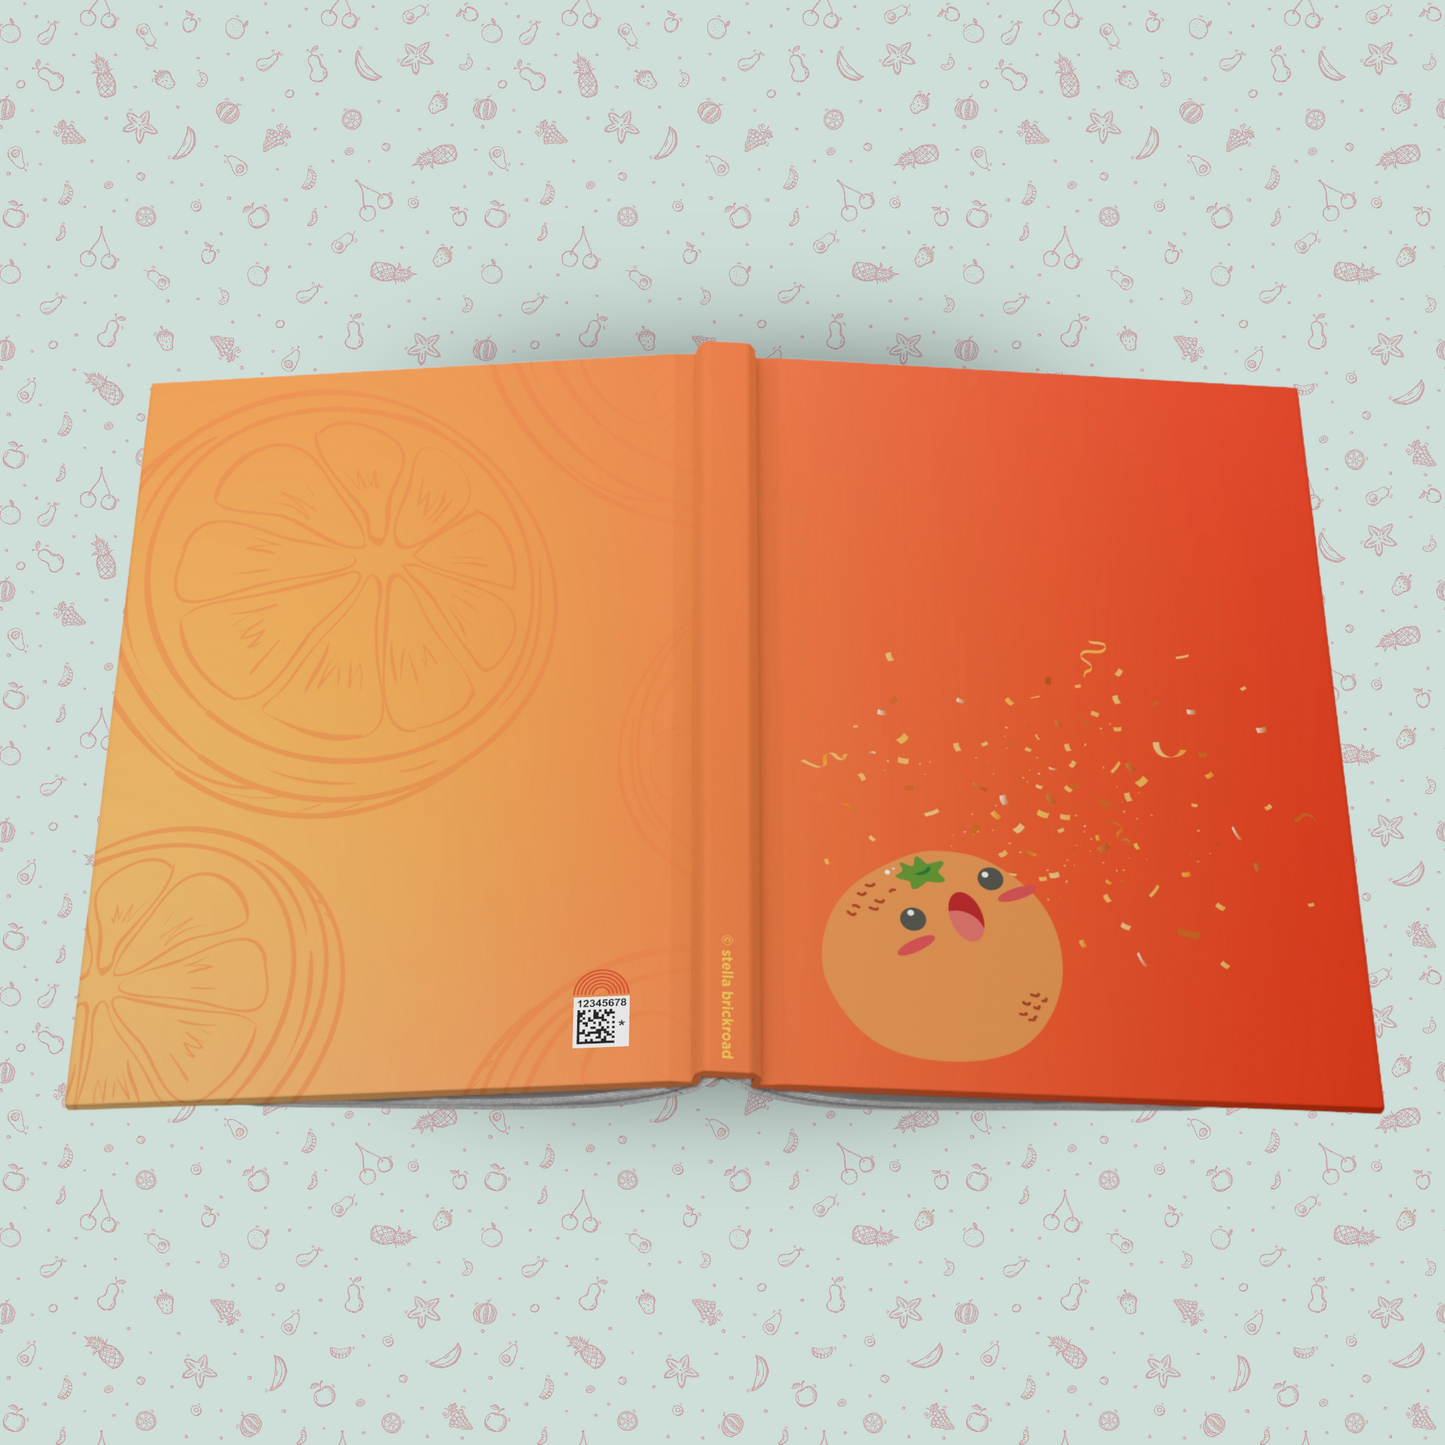 Celebratory Orange Friend Hardcover Journal Notebook Matte | Fruit with Personality Journal | Fruit and Berry Themed Blank Lined Notepad | Food Diary